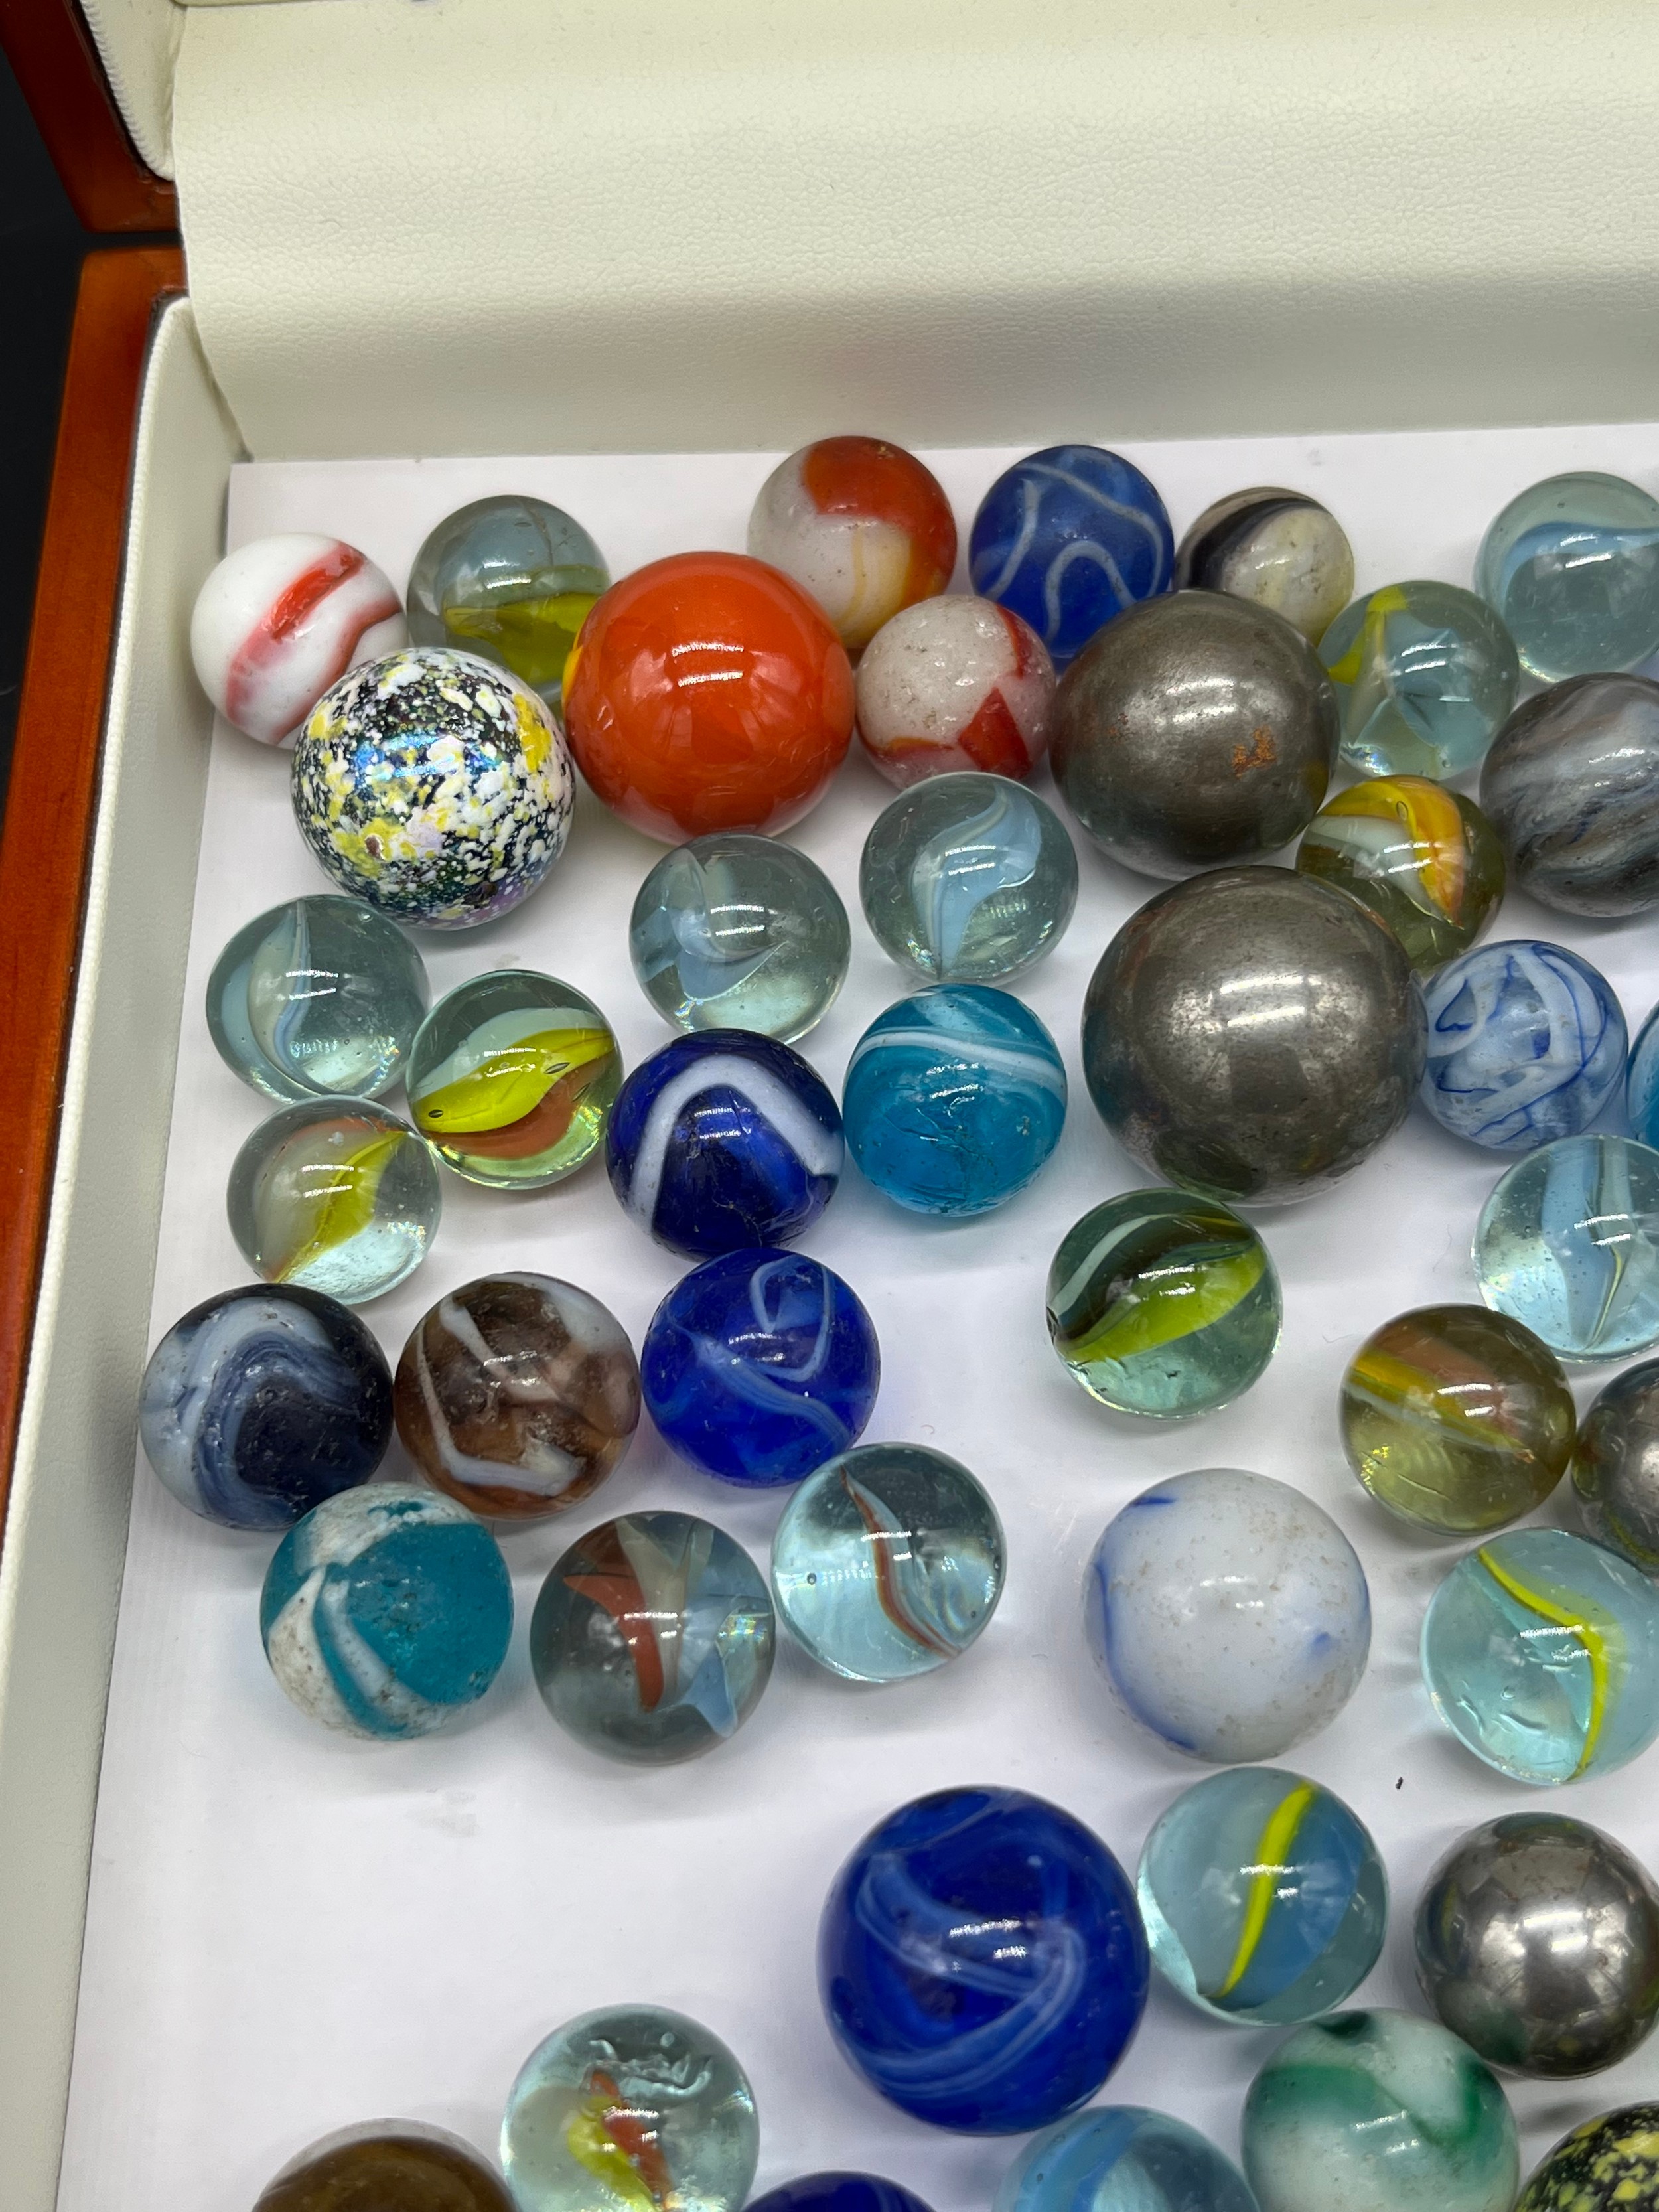 A Quantity of antique and vintage marbles includes two witches eye marbles, various cat eyes and - Image 2 of 3